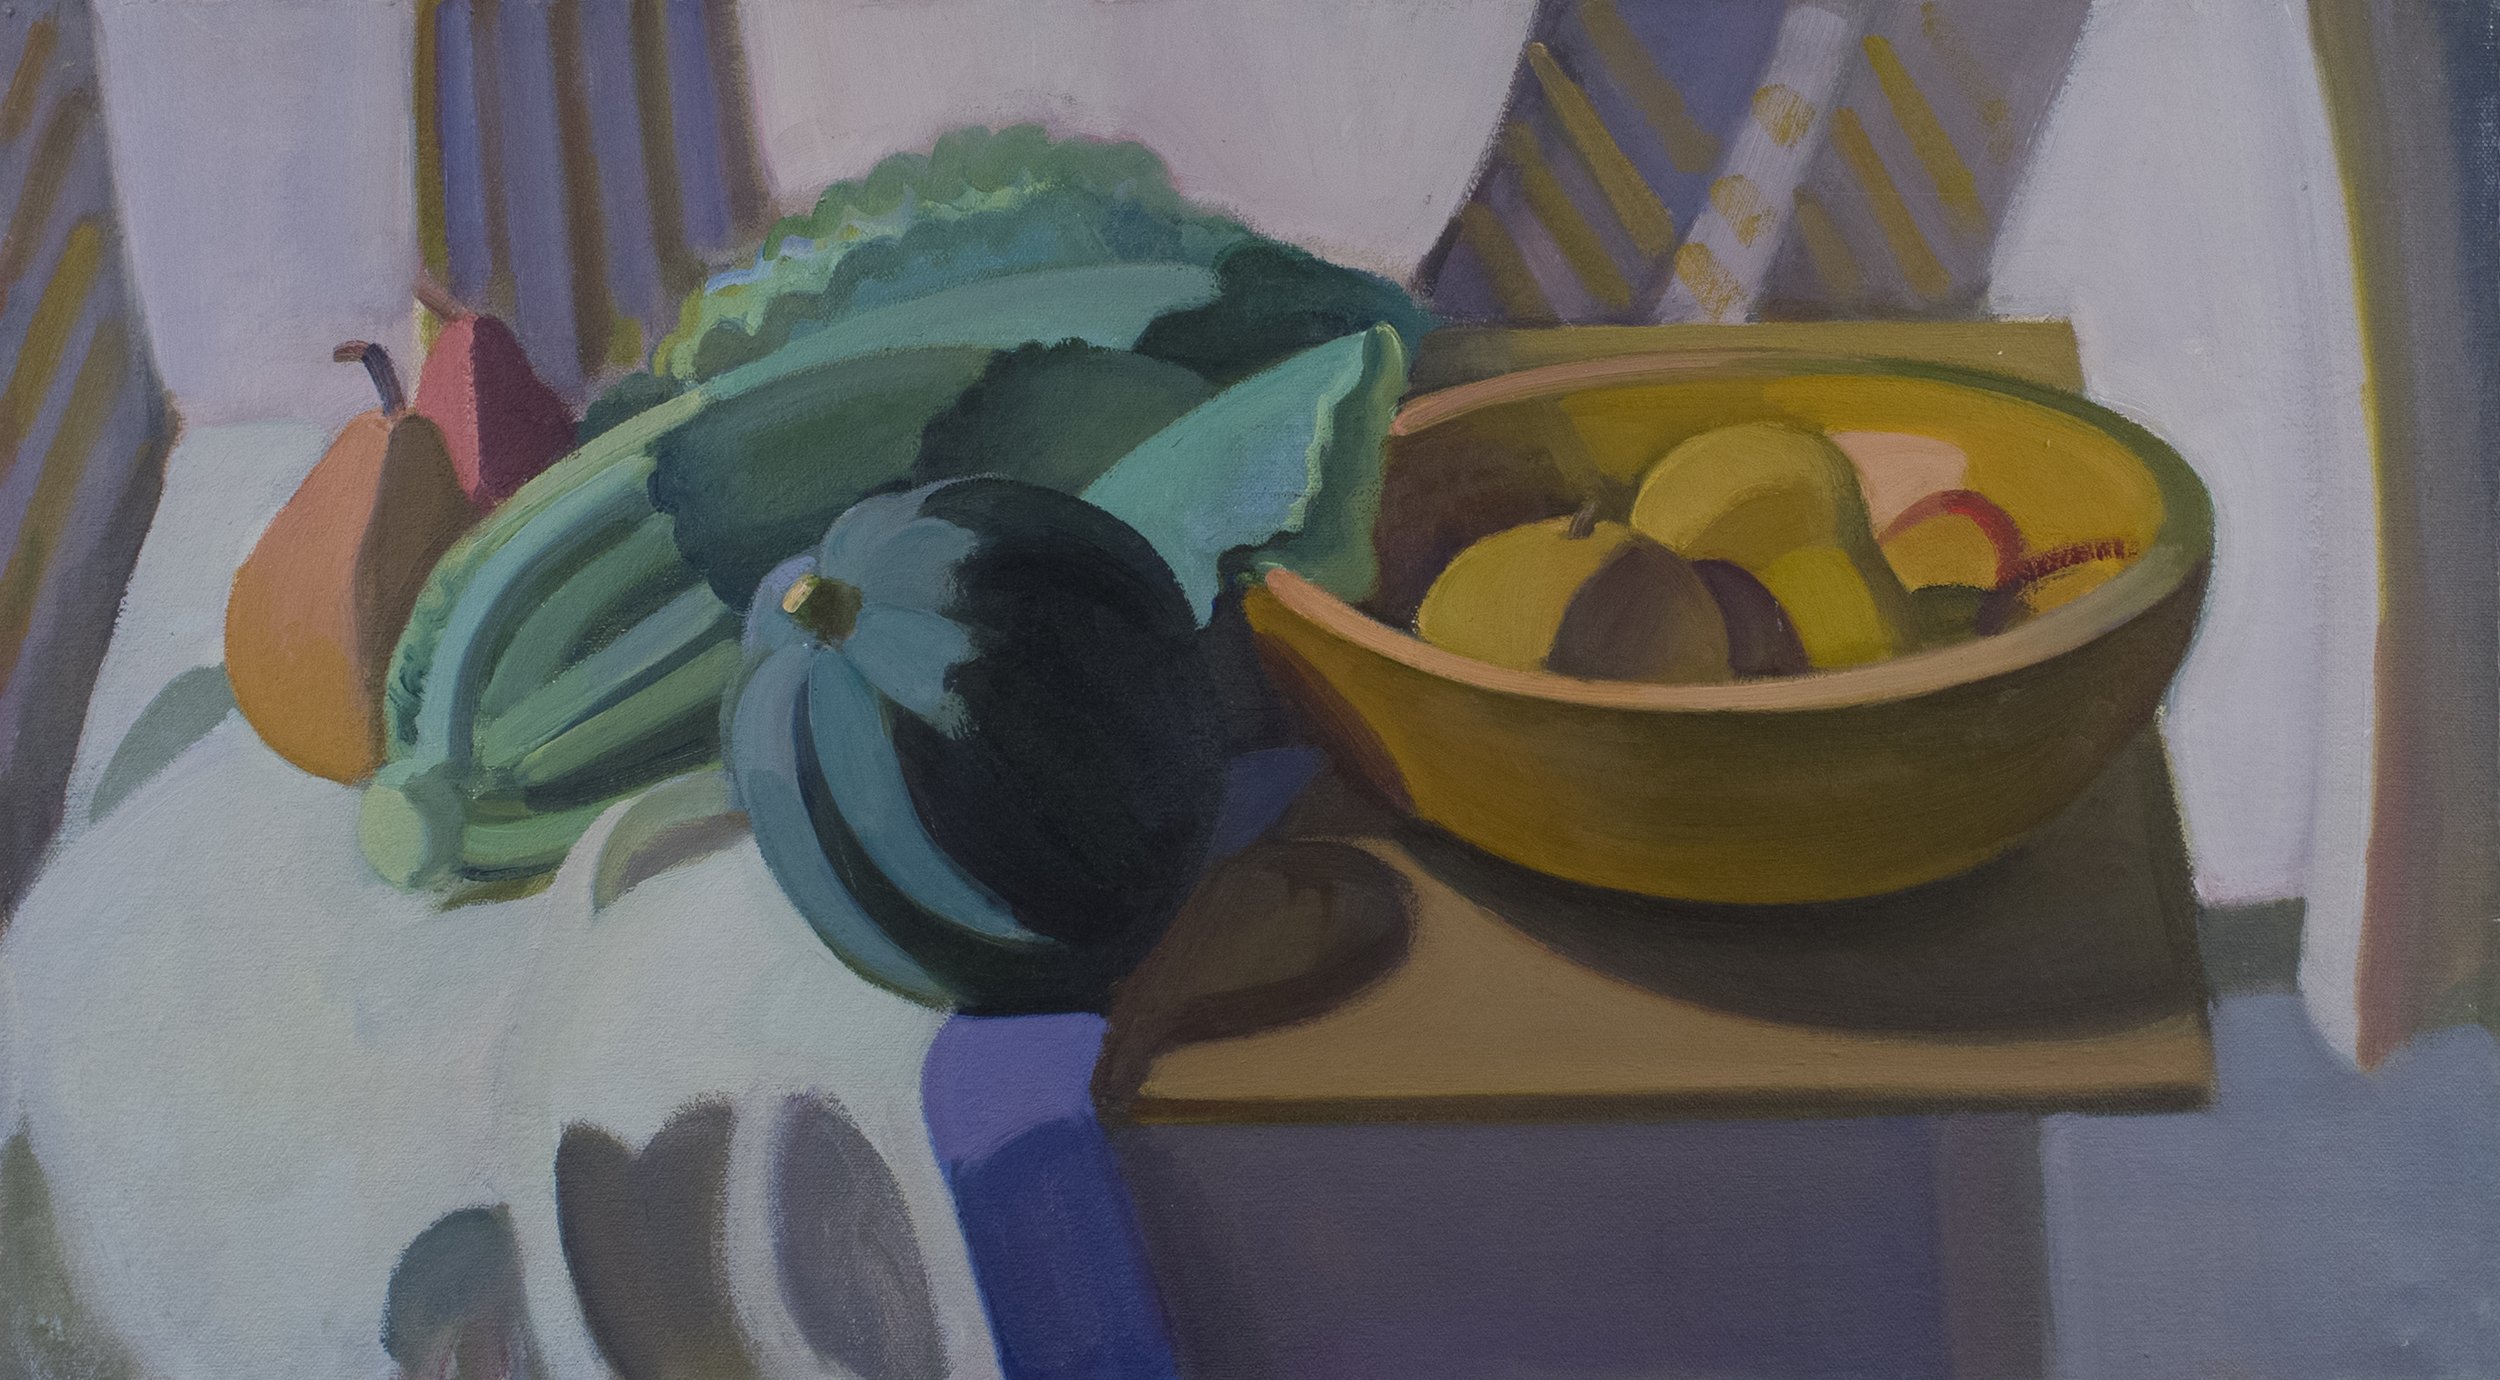   Pears in Wooden Bowl, Chinese Cabbage , c. 1998, oil/canvas (signed and framed by the artist), 14 x 25 in., $2,000 